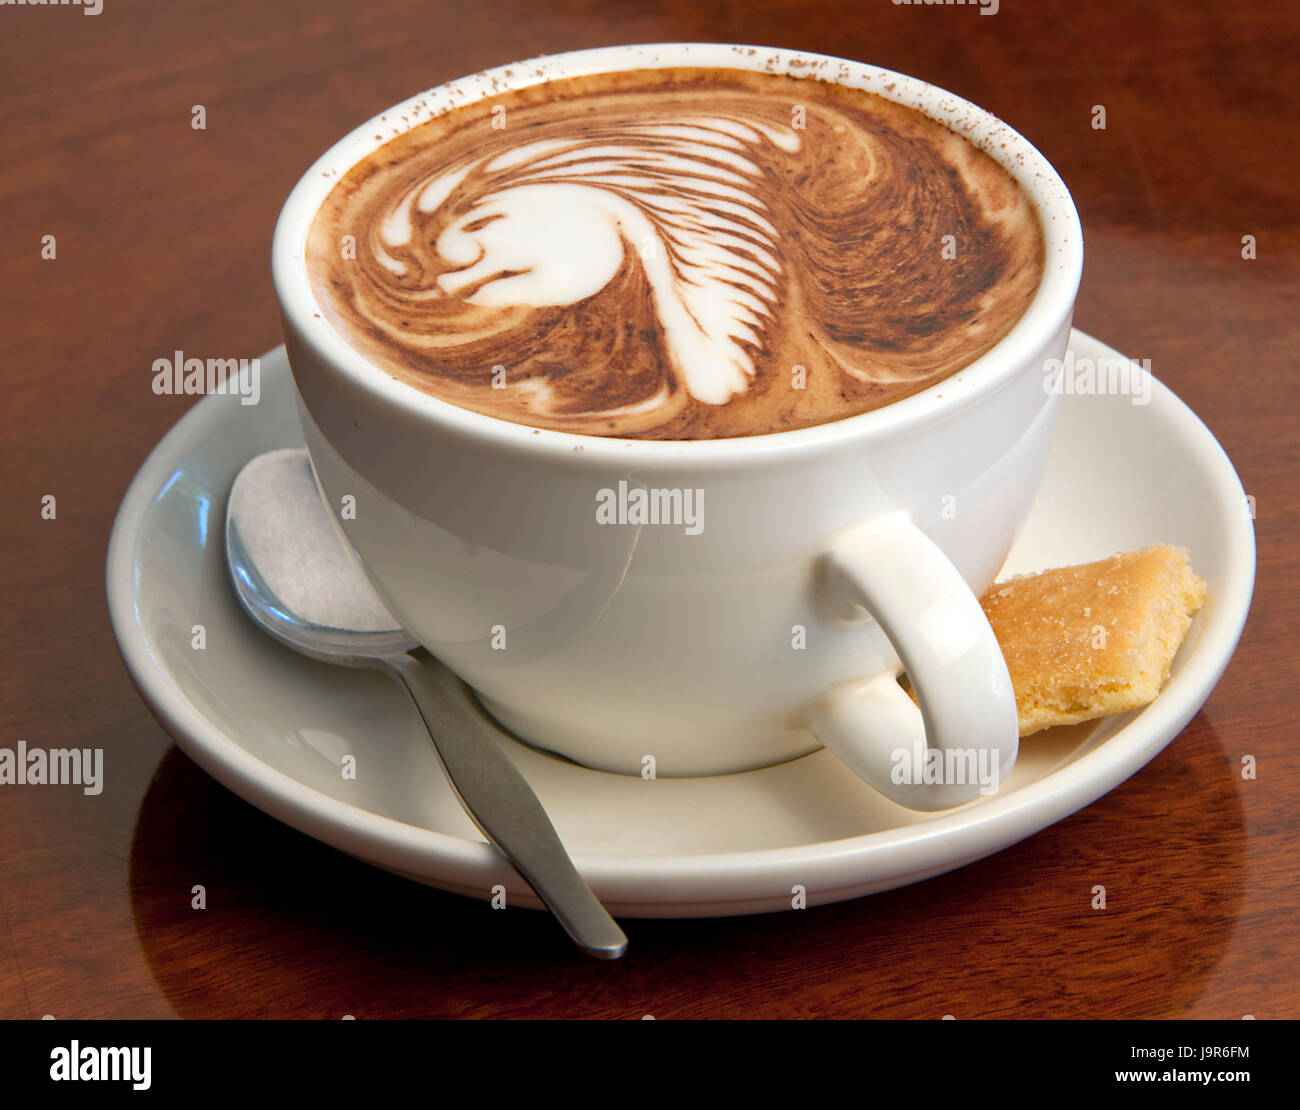 Typical Australian style coffee with illustrative cream topping. Stock Photo